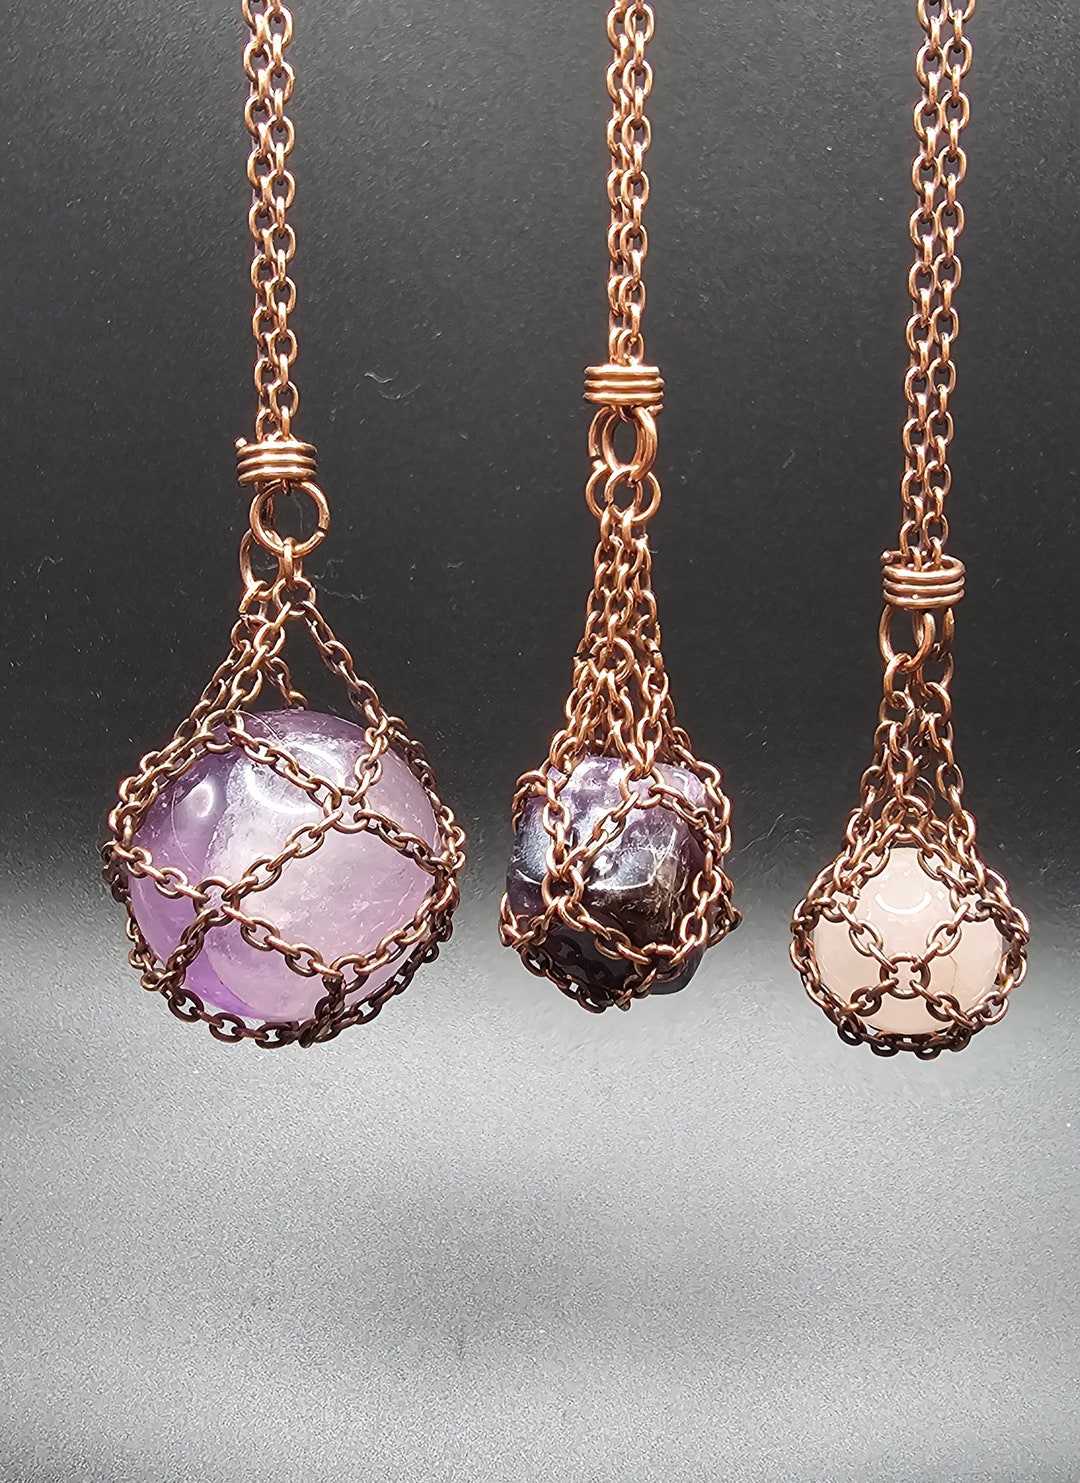 Cordial Design Jewelry Accessories/Crystal Copper Chain/Geometry